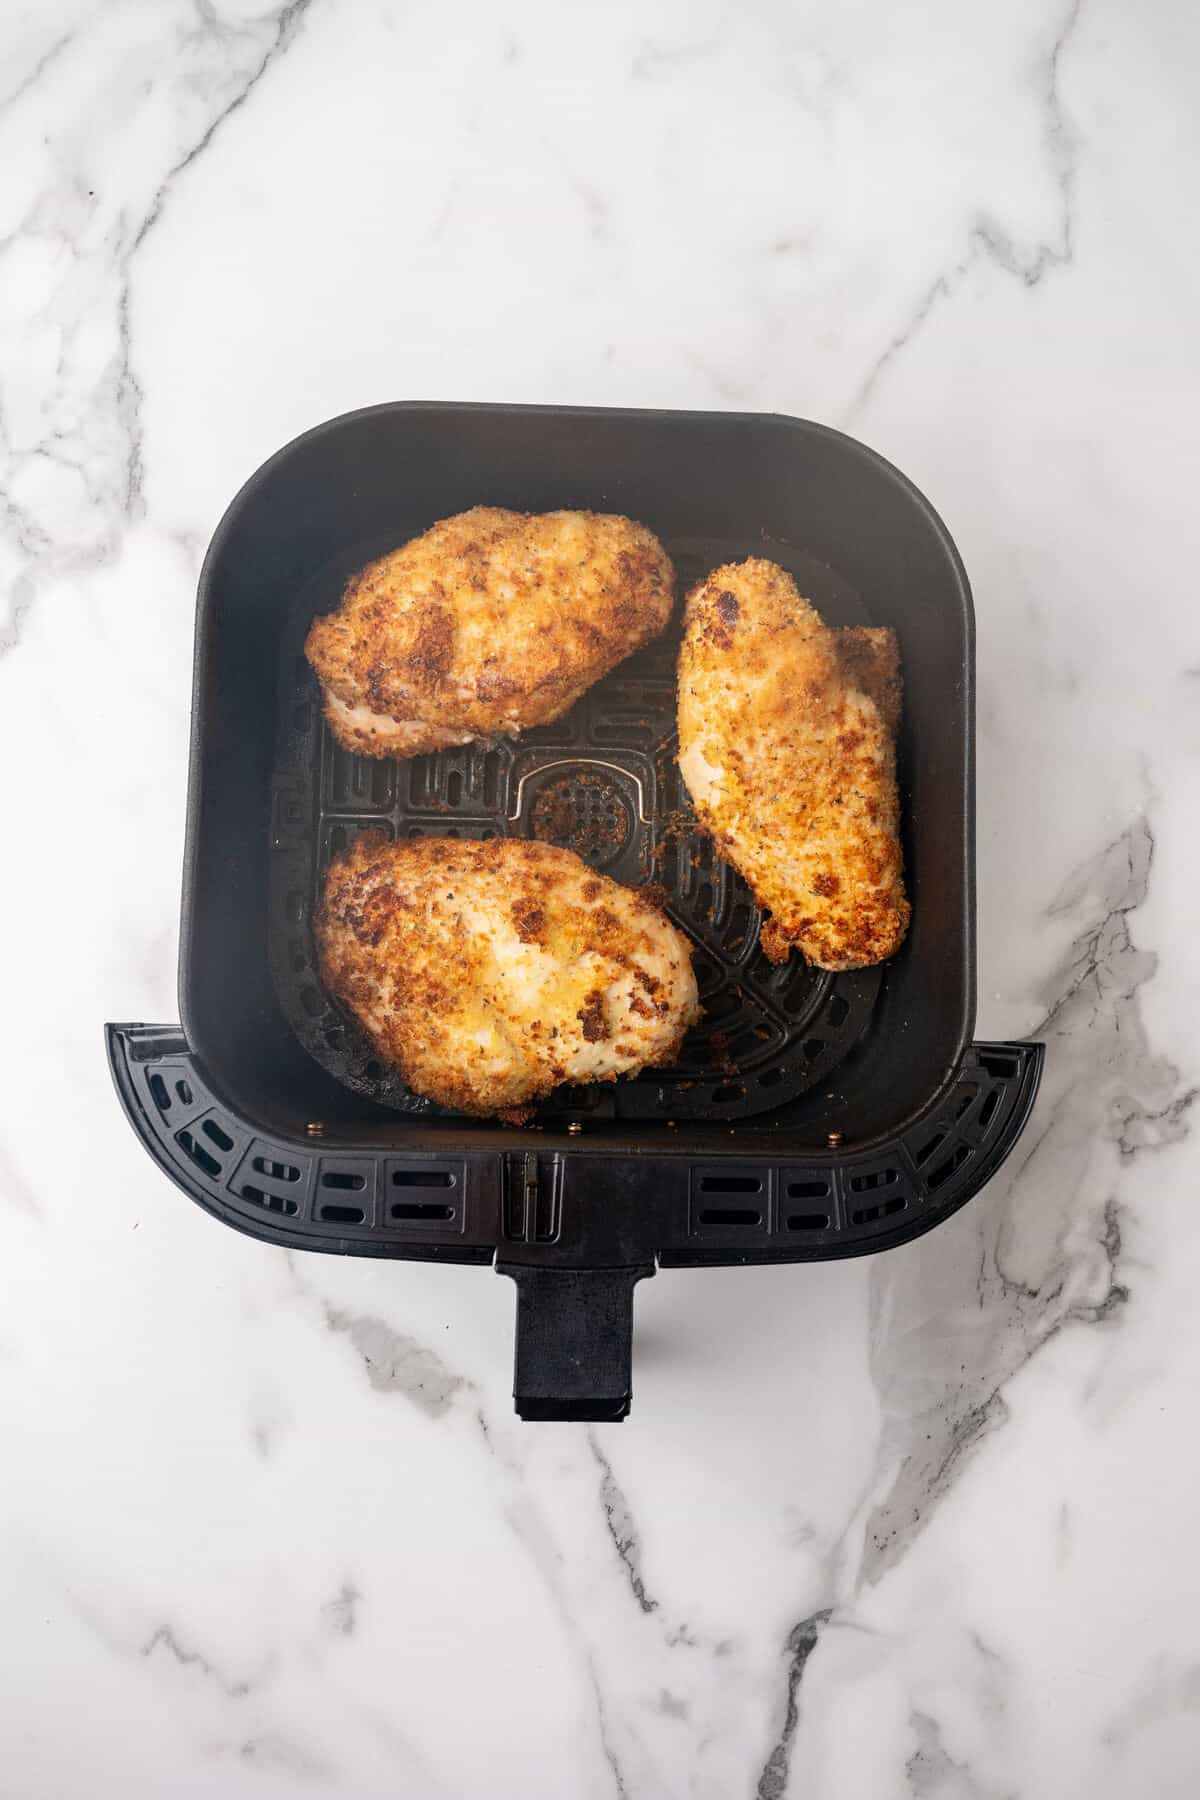 Three breaded Parmesan chicken breasts cooking in a air fryer basked on a marble surface.